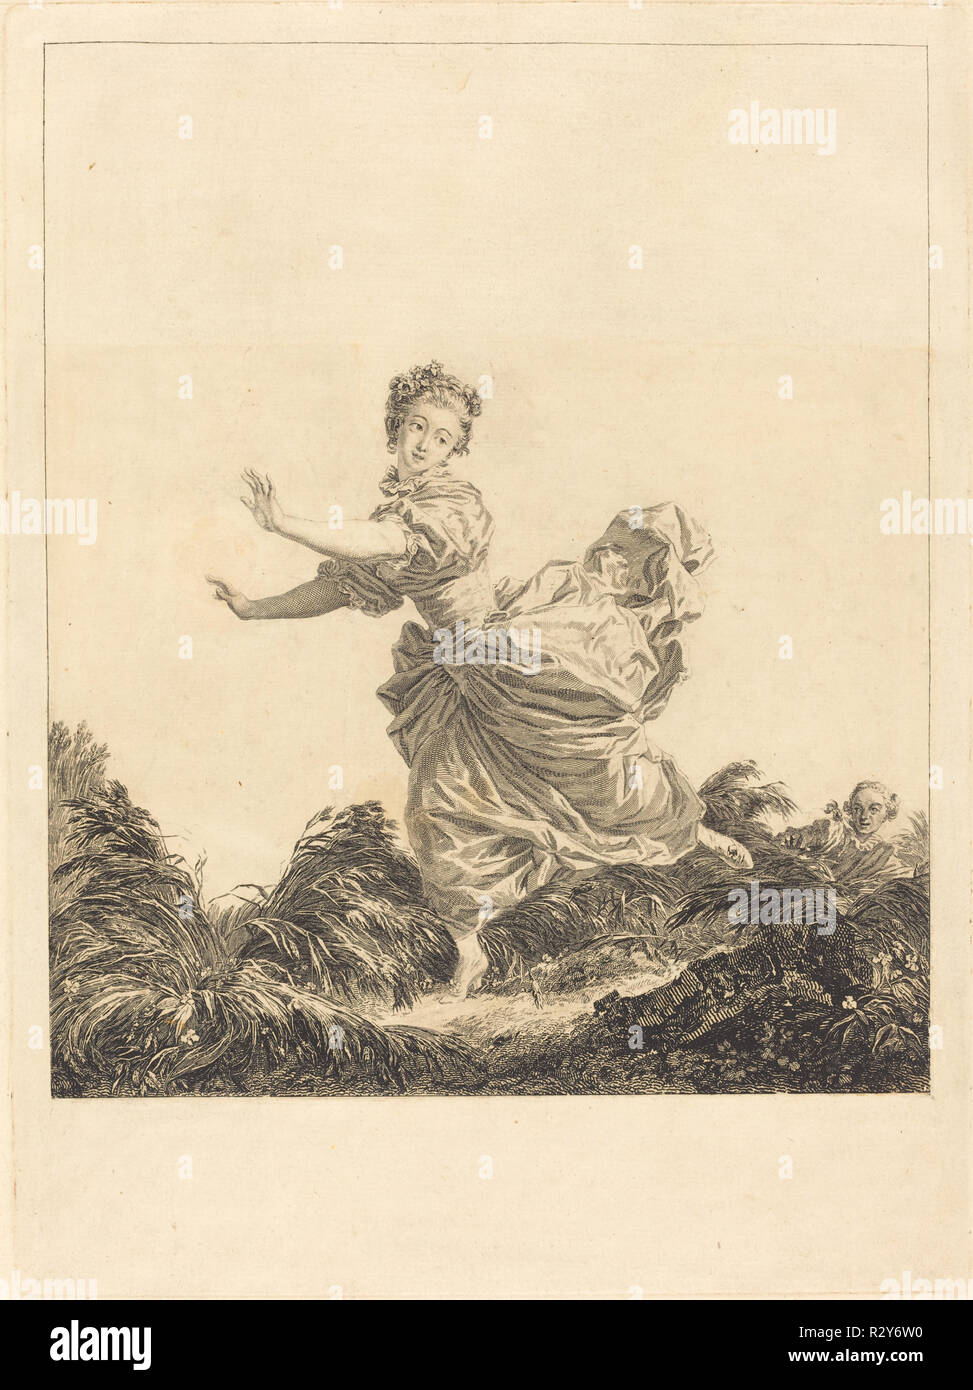 La fuite a dessein. Dated: 1783. Dimensions: plate: 37.3 x 29 cm (14 11/16 x 11 7/16 in.)  sheet: 40.9 x 31.7 cm (16 1/8 x 12 1/2 in.). Medium: etching. Museum: National Gallery of Art, Washington DC. Author: Charles François Adrien Macret after Jean-Honoré Fragonard. Stock Photo